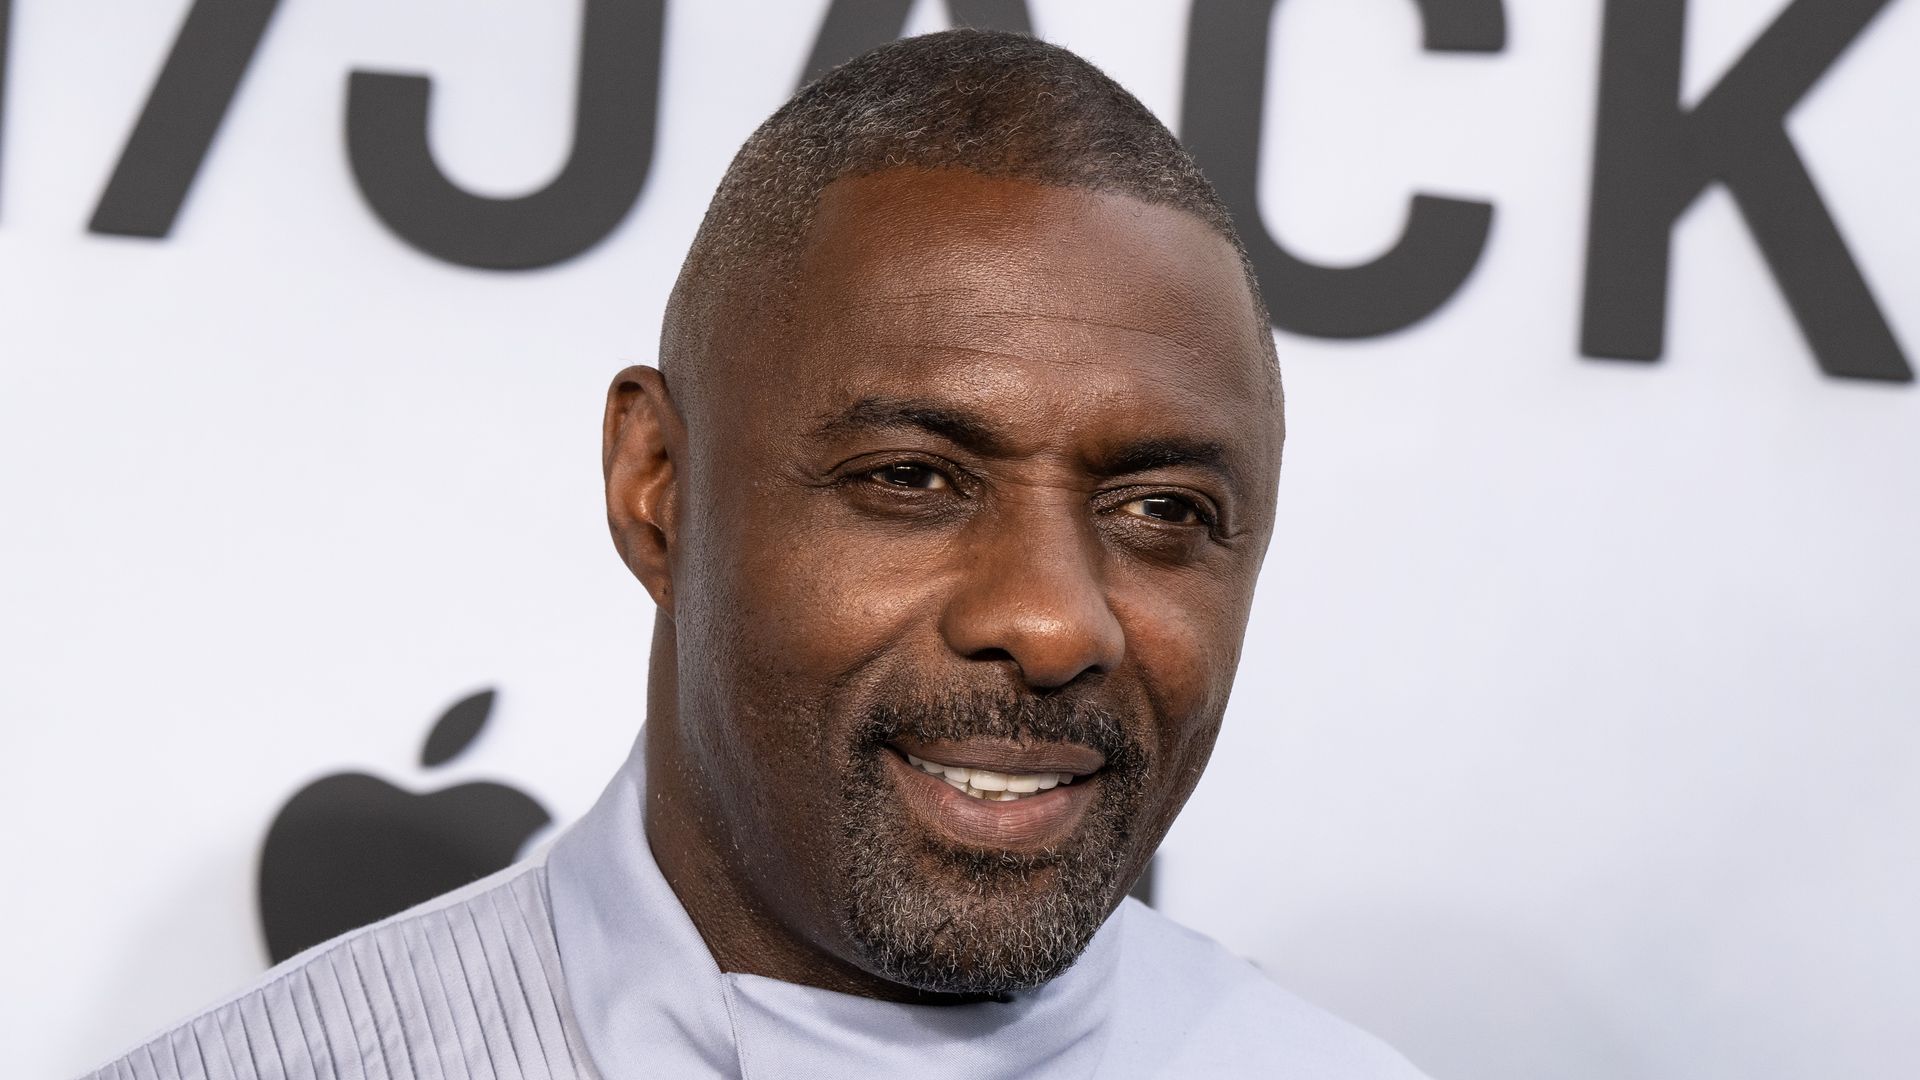 Idris Elba arrives at the World Premiere of "Hijack" at BFI Southbank on June 27, 2023 in London, England.